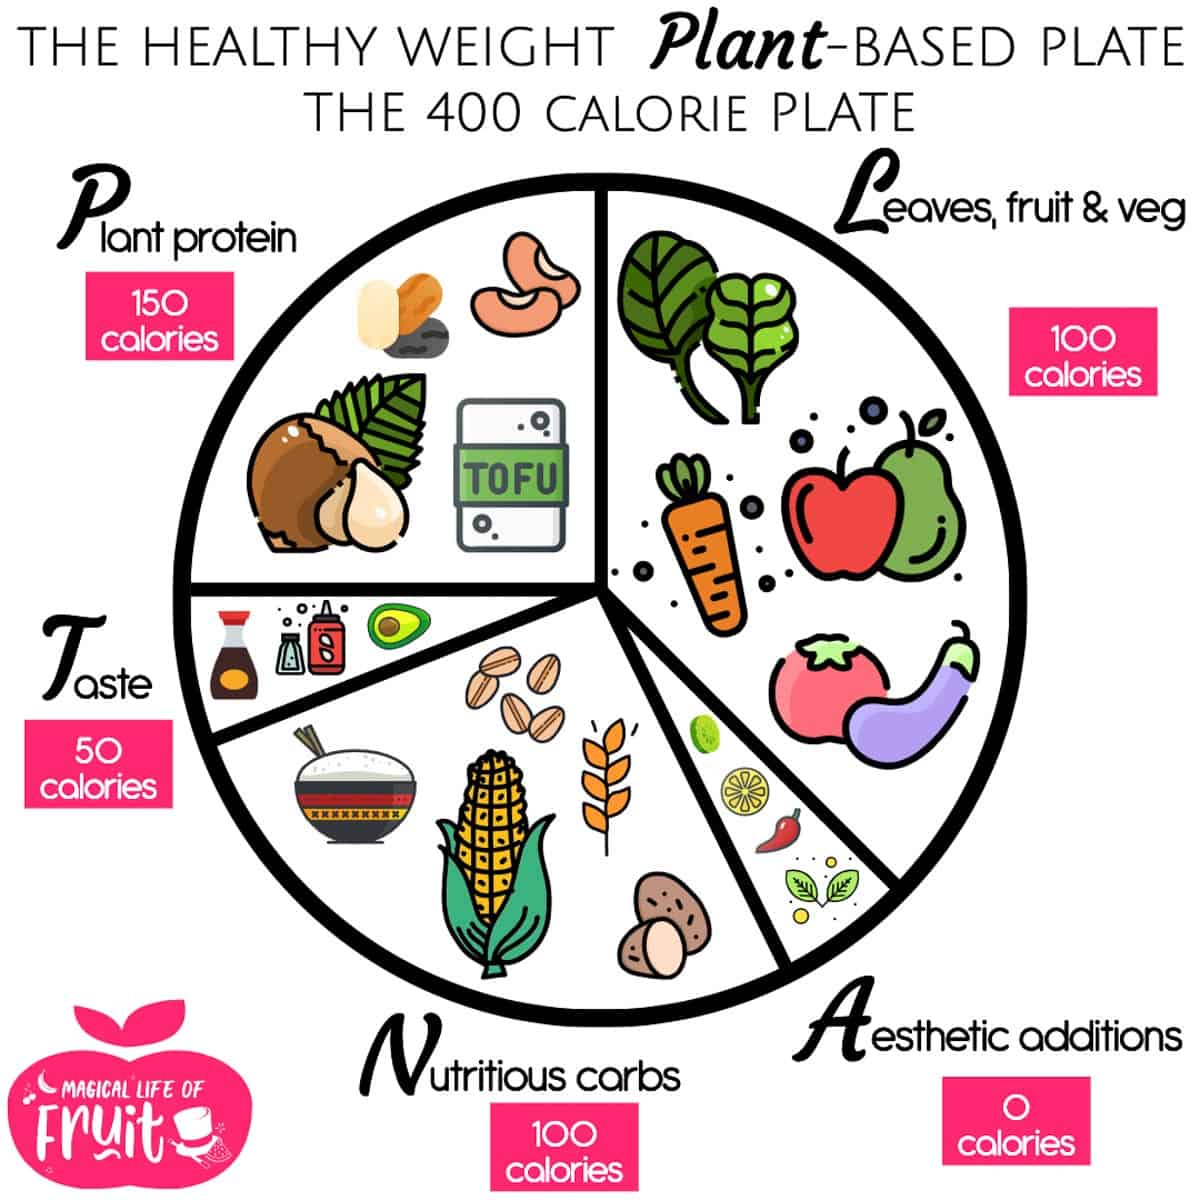 COMPLETE MEAL 400 CALORIES: The Healthy Weight Plant Based Plate